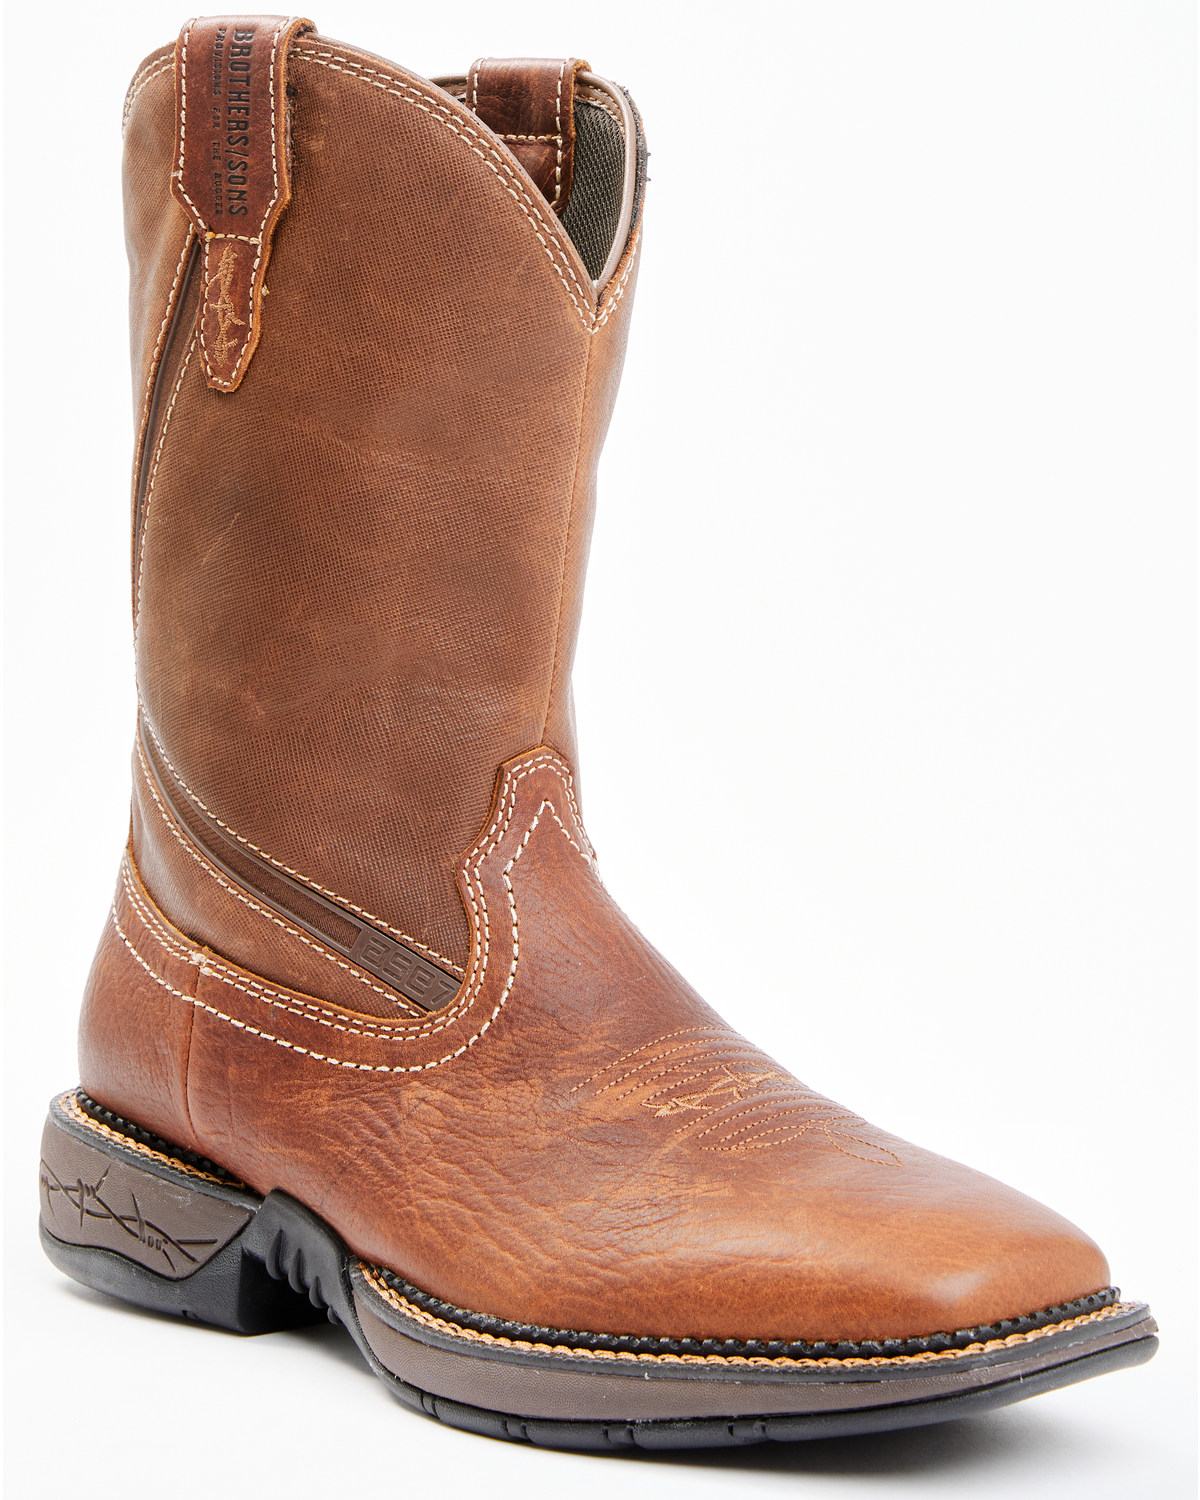 Brothers and Sons Men's Lite Western Performance Boots - Broad Square Toe